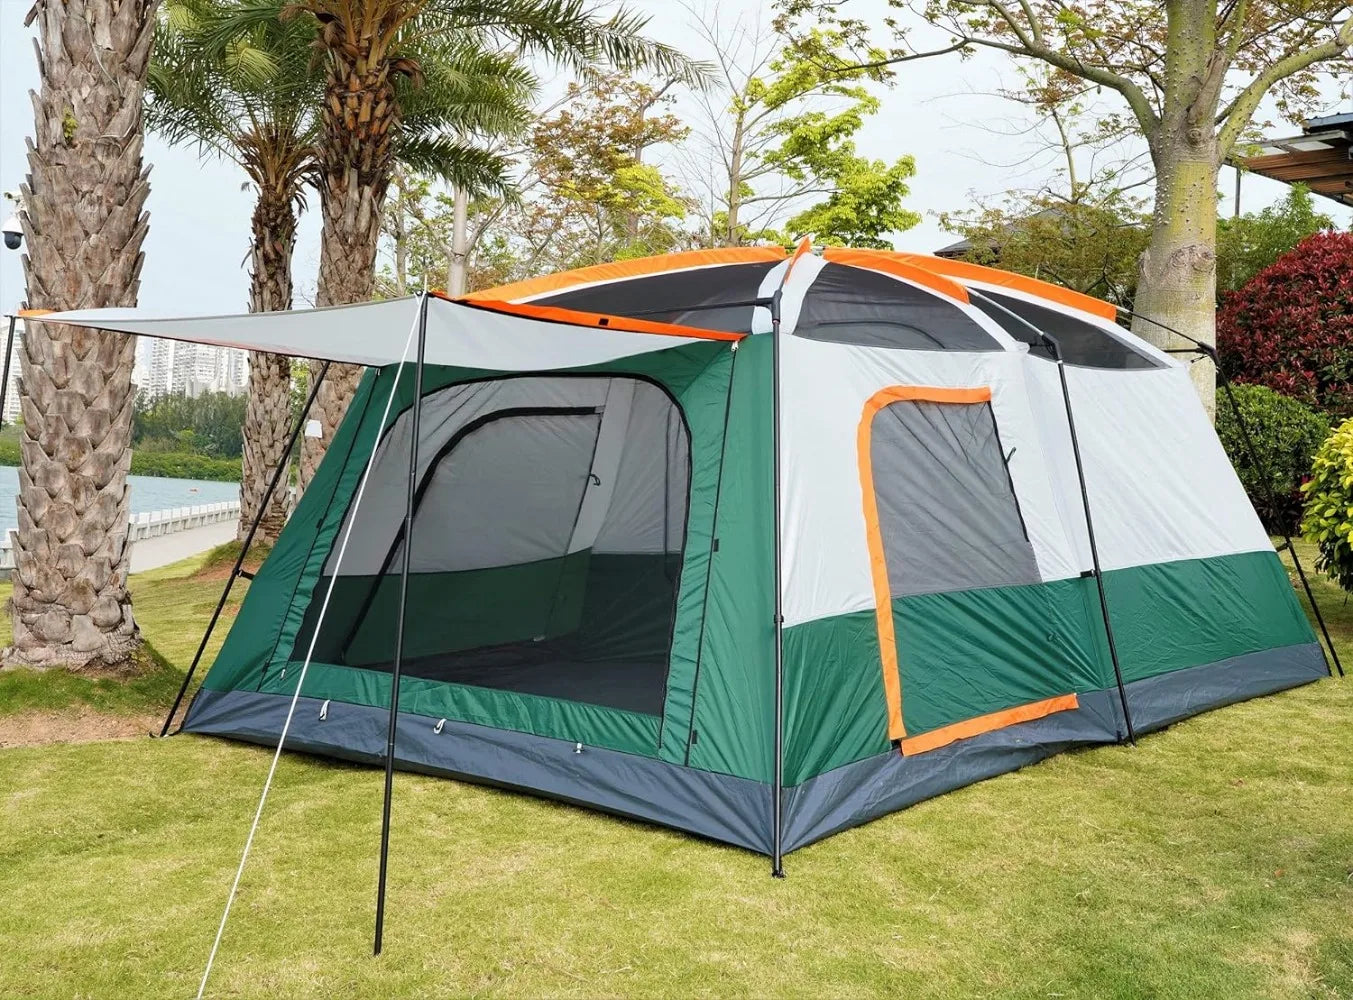 KTT Large Tent 12 Person(Style-B),Family Cabin Tents,2 Rooms, Straight Wall, 3 Doors and 3 Windows